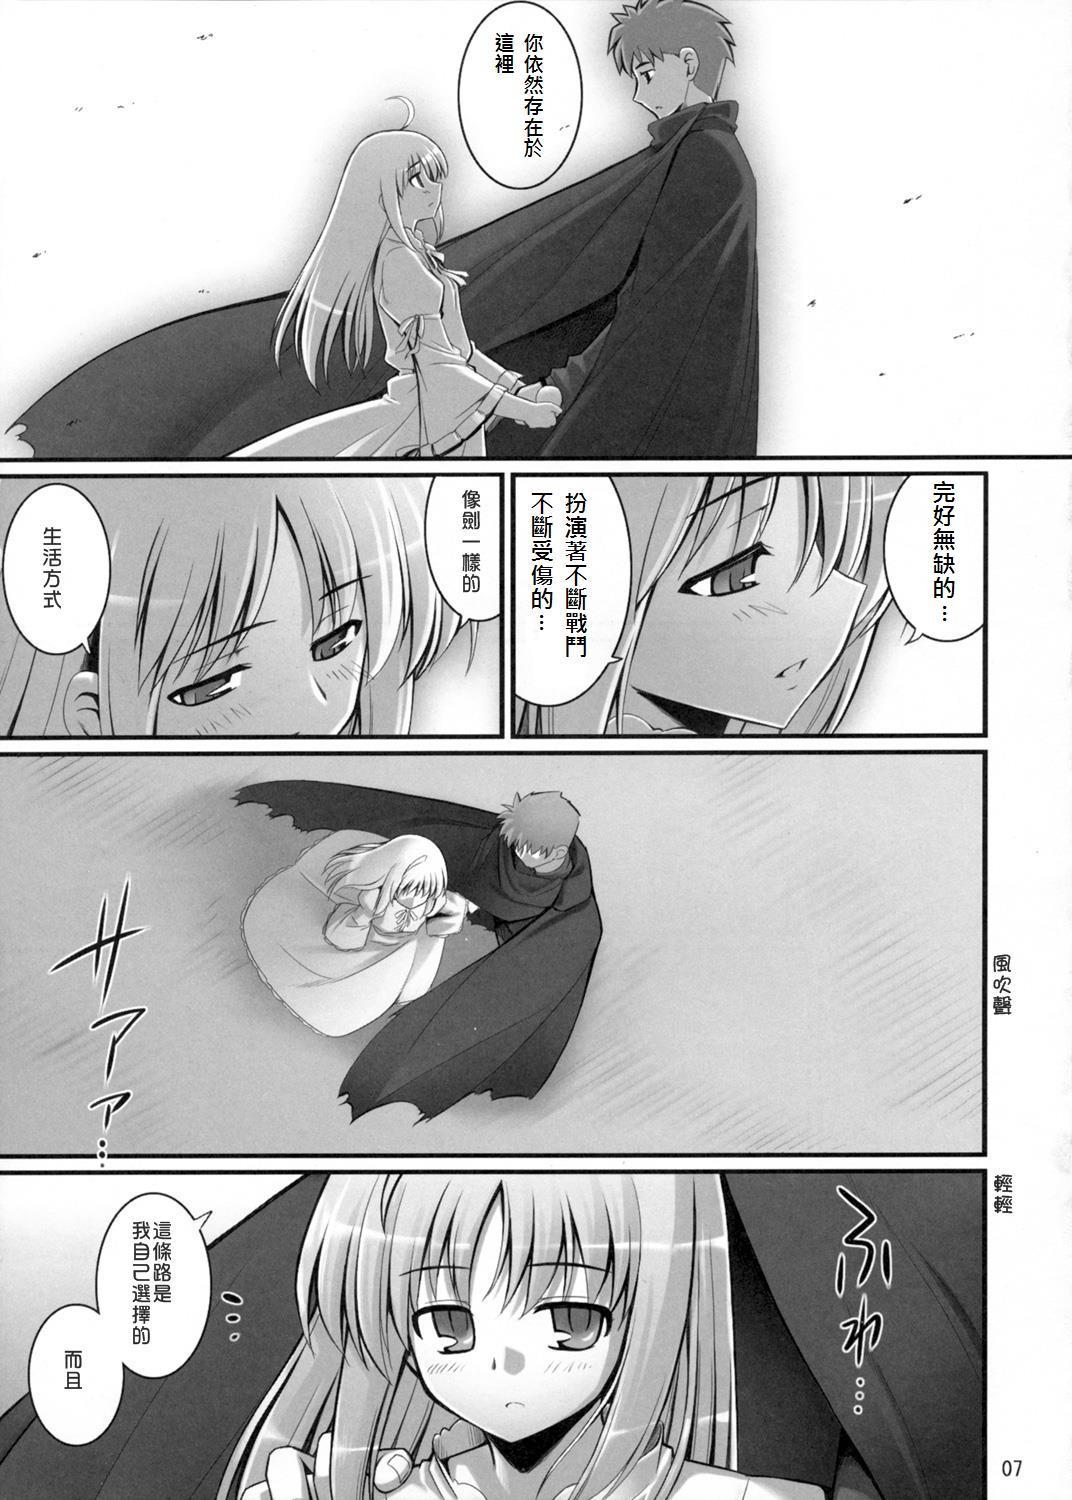 Periscope RE 06 - Fate stay night Sex Pussy - Page 7